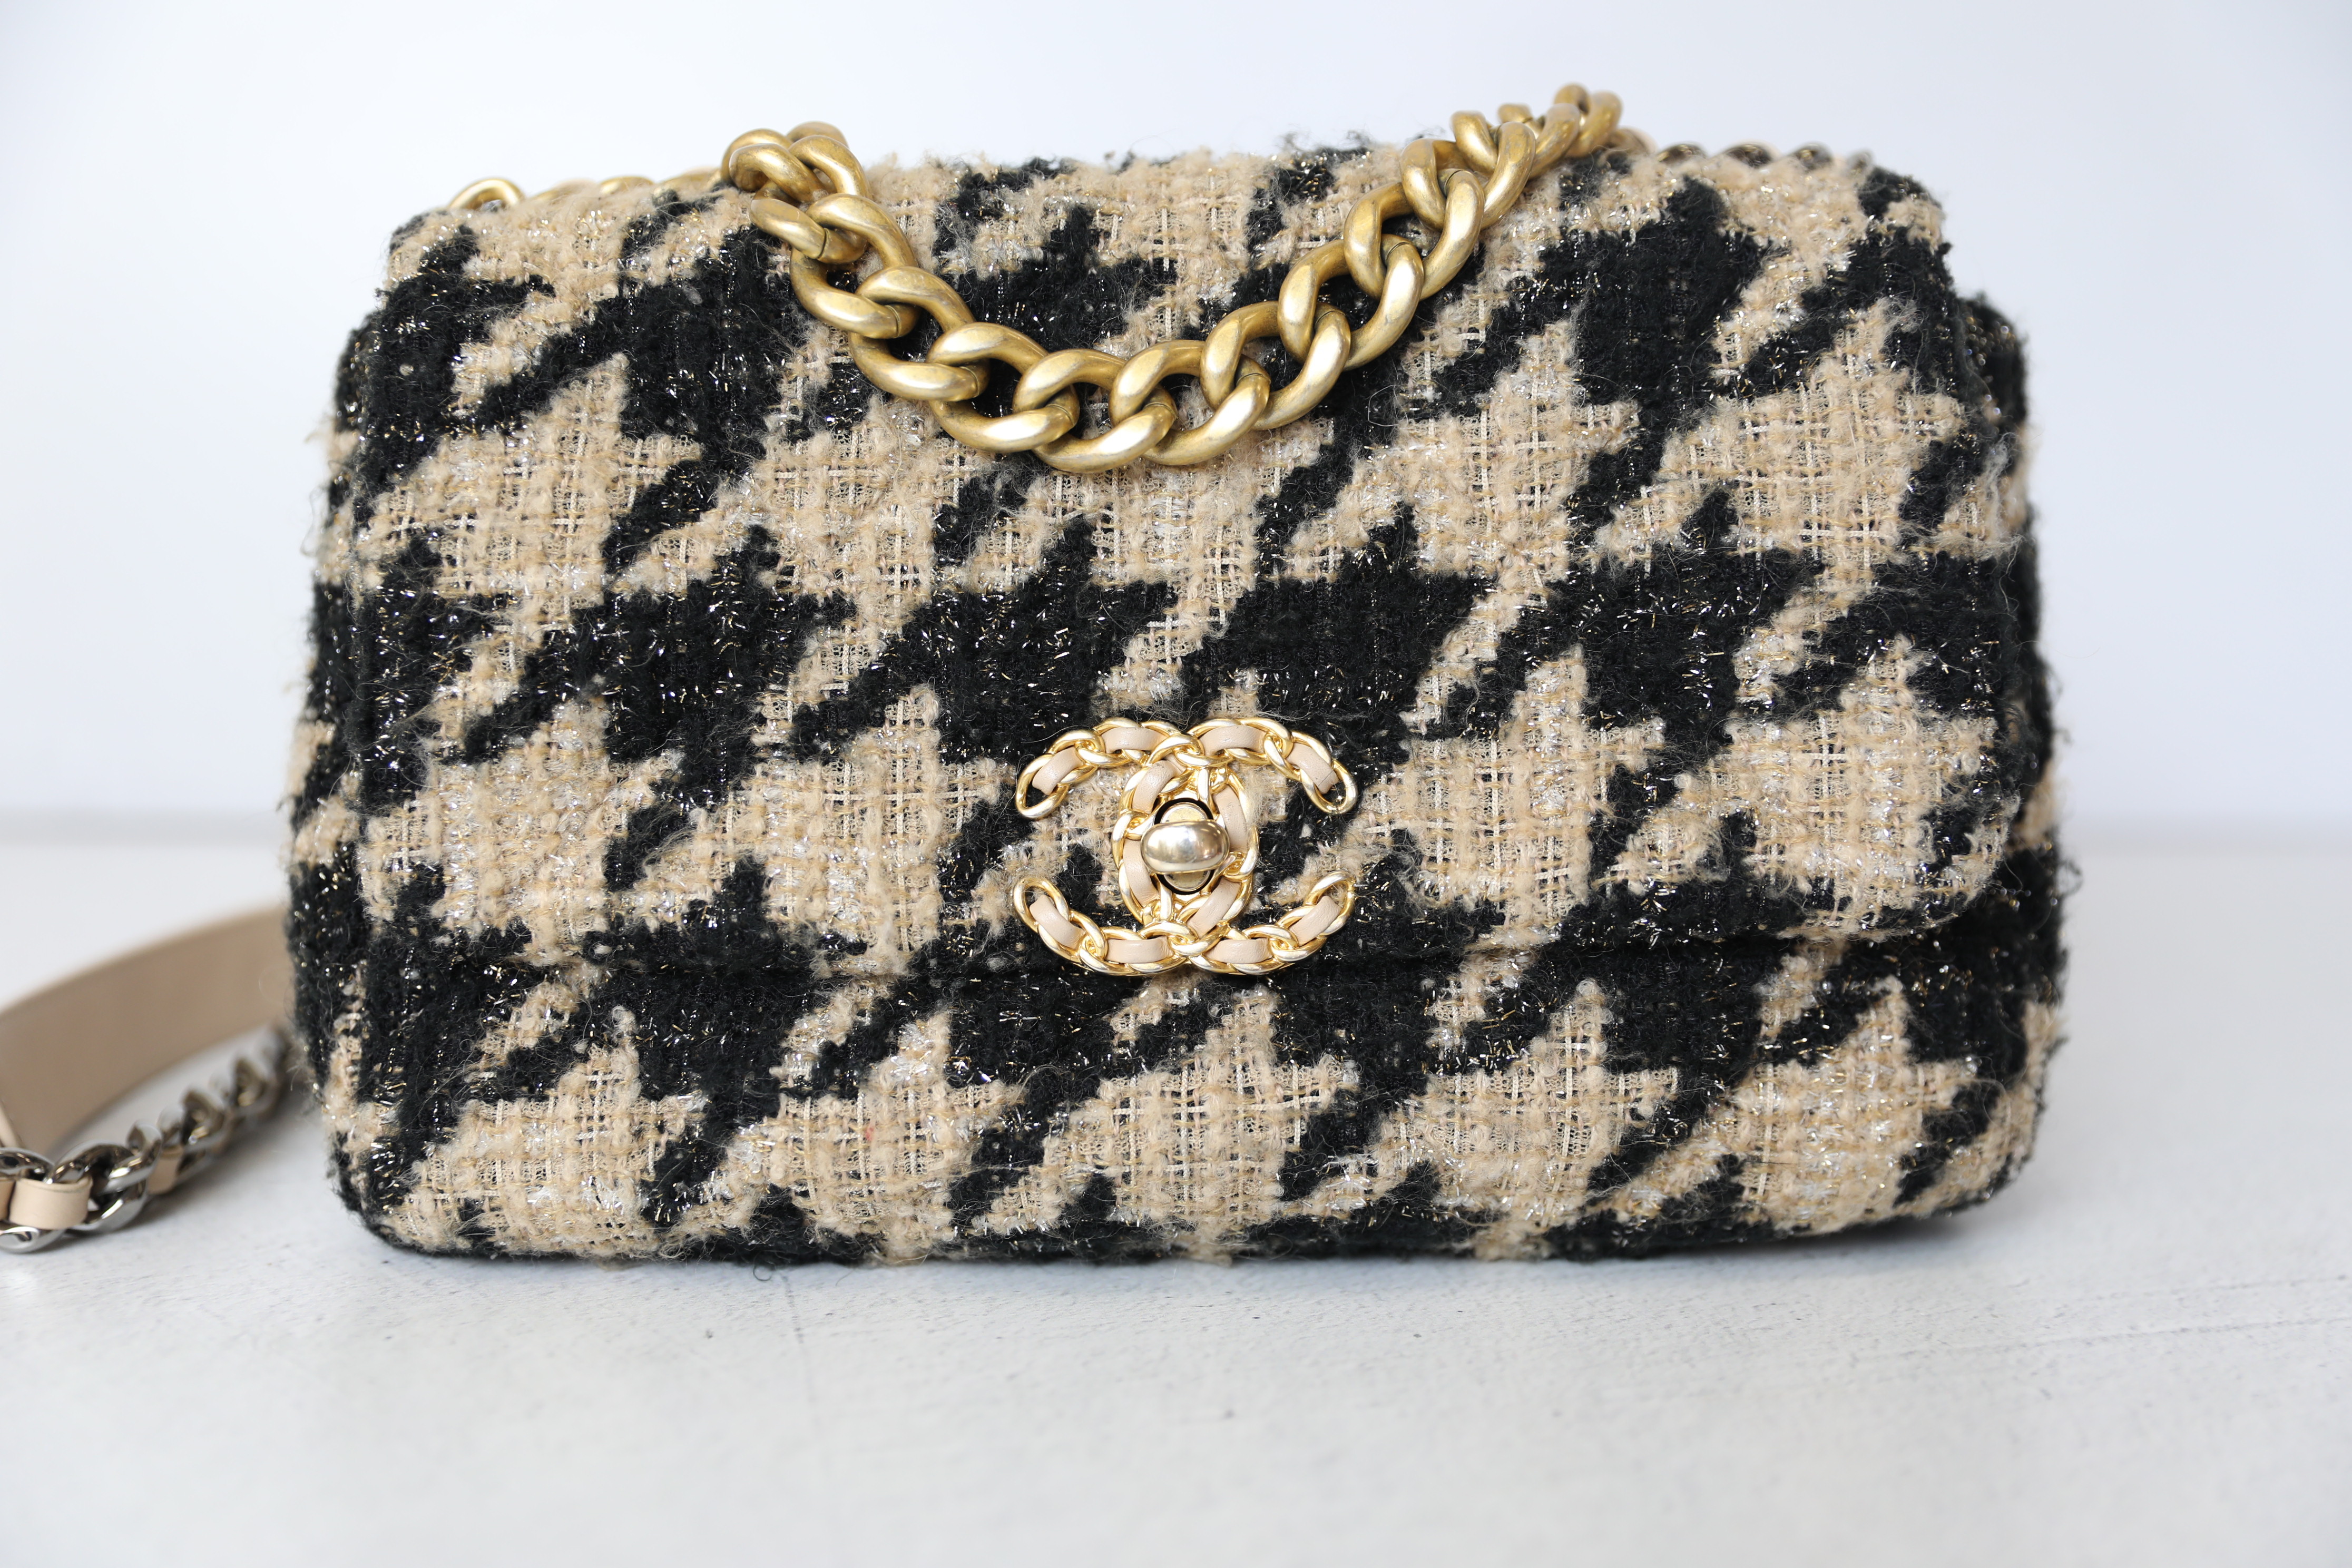 Chanel 19 Small, Beige and Black Houndstooth Tweed, Preowned